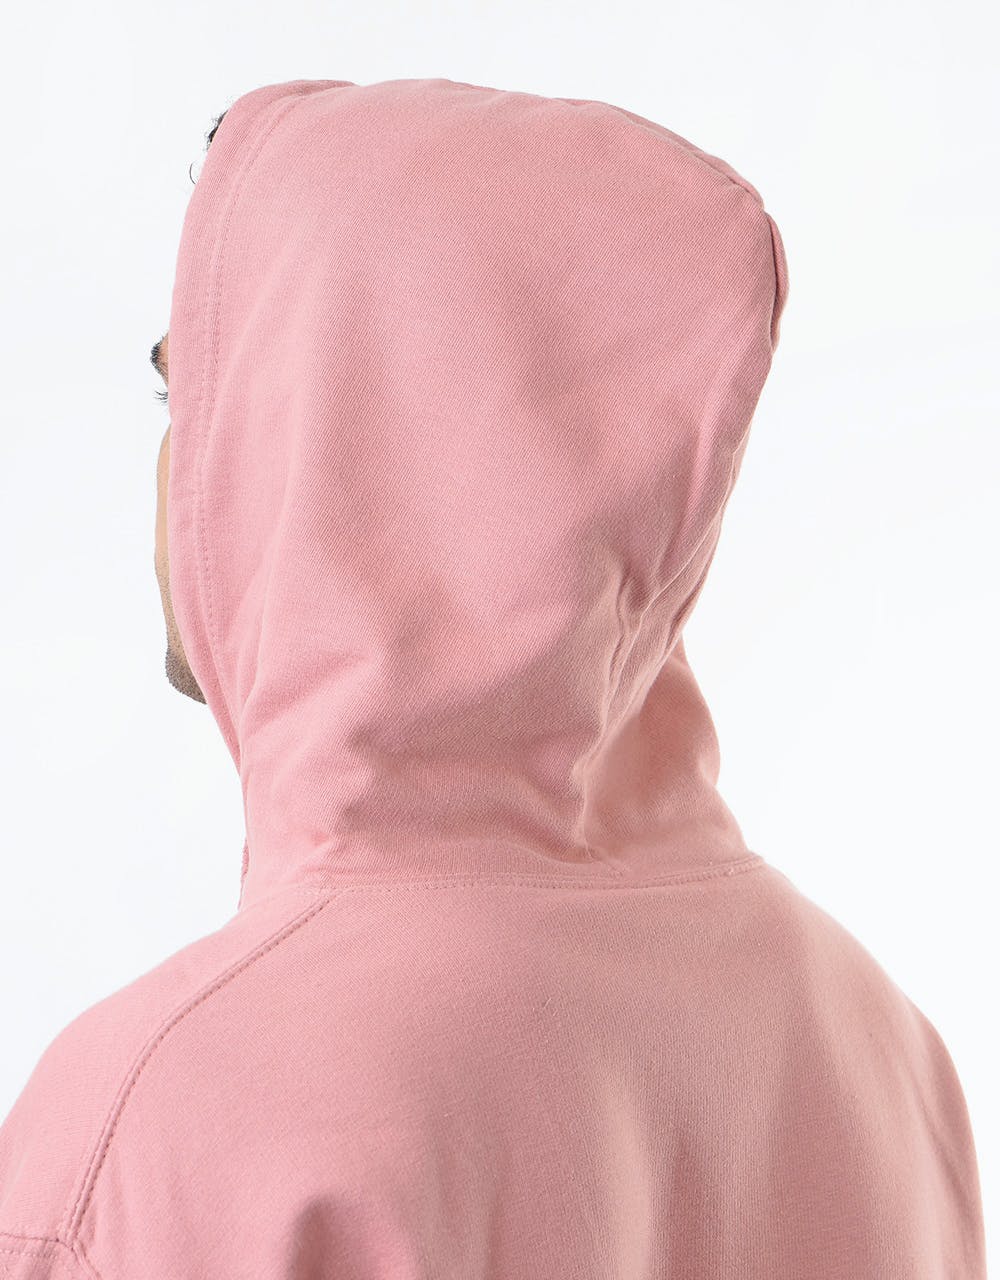 Route One Mate Pullover Hoodie - Dusty Pink